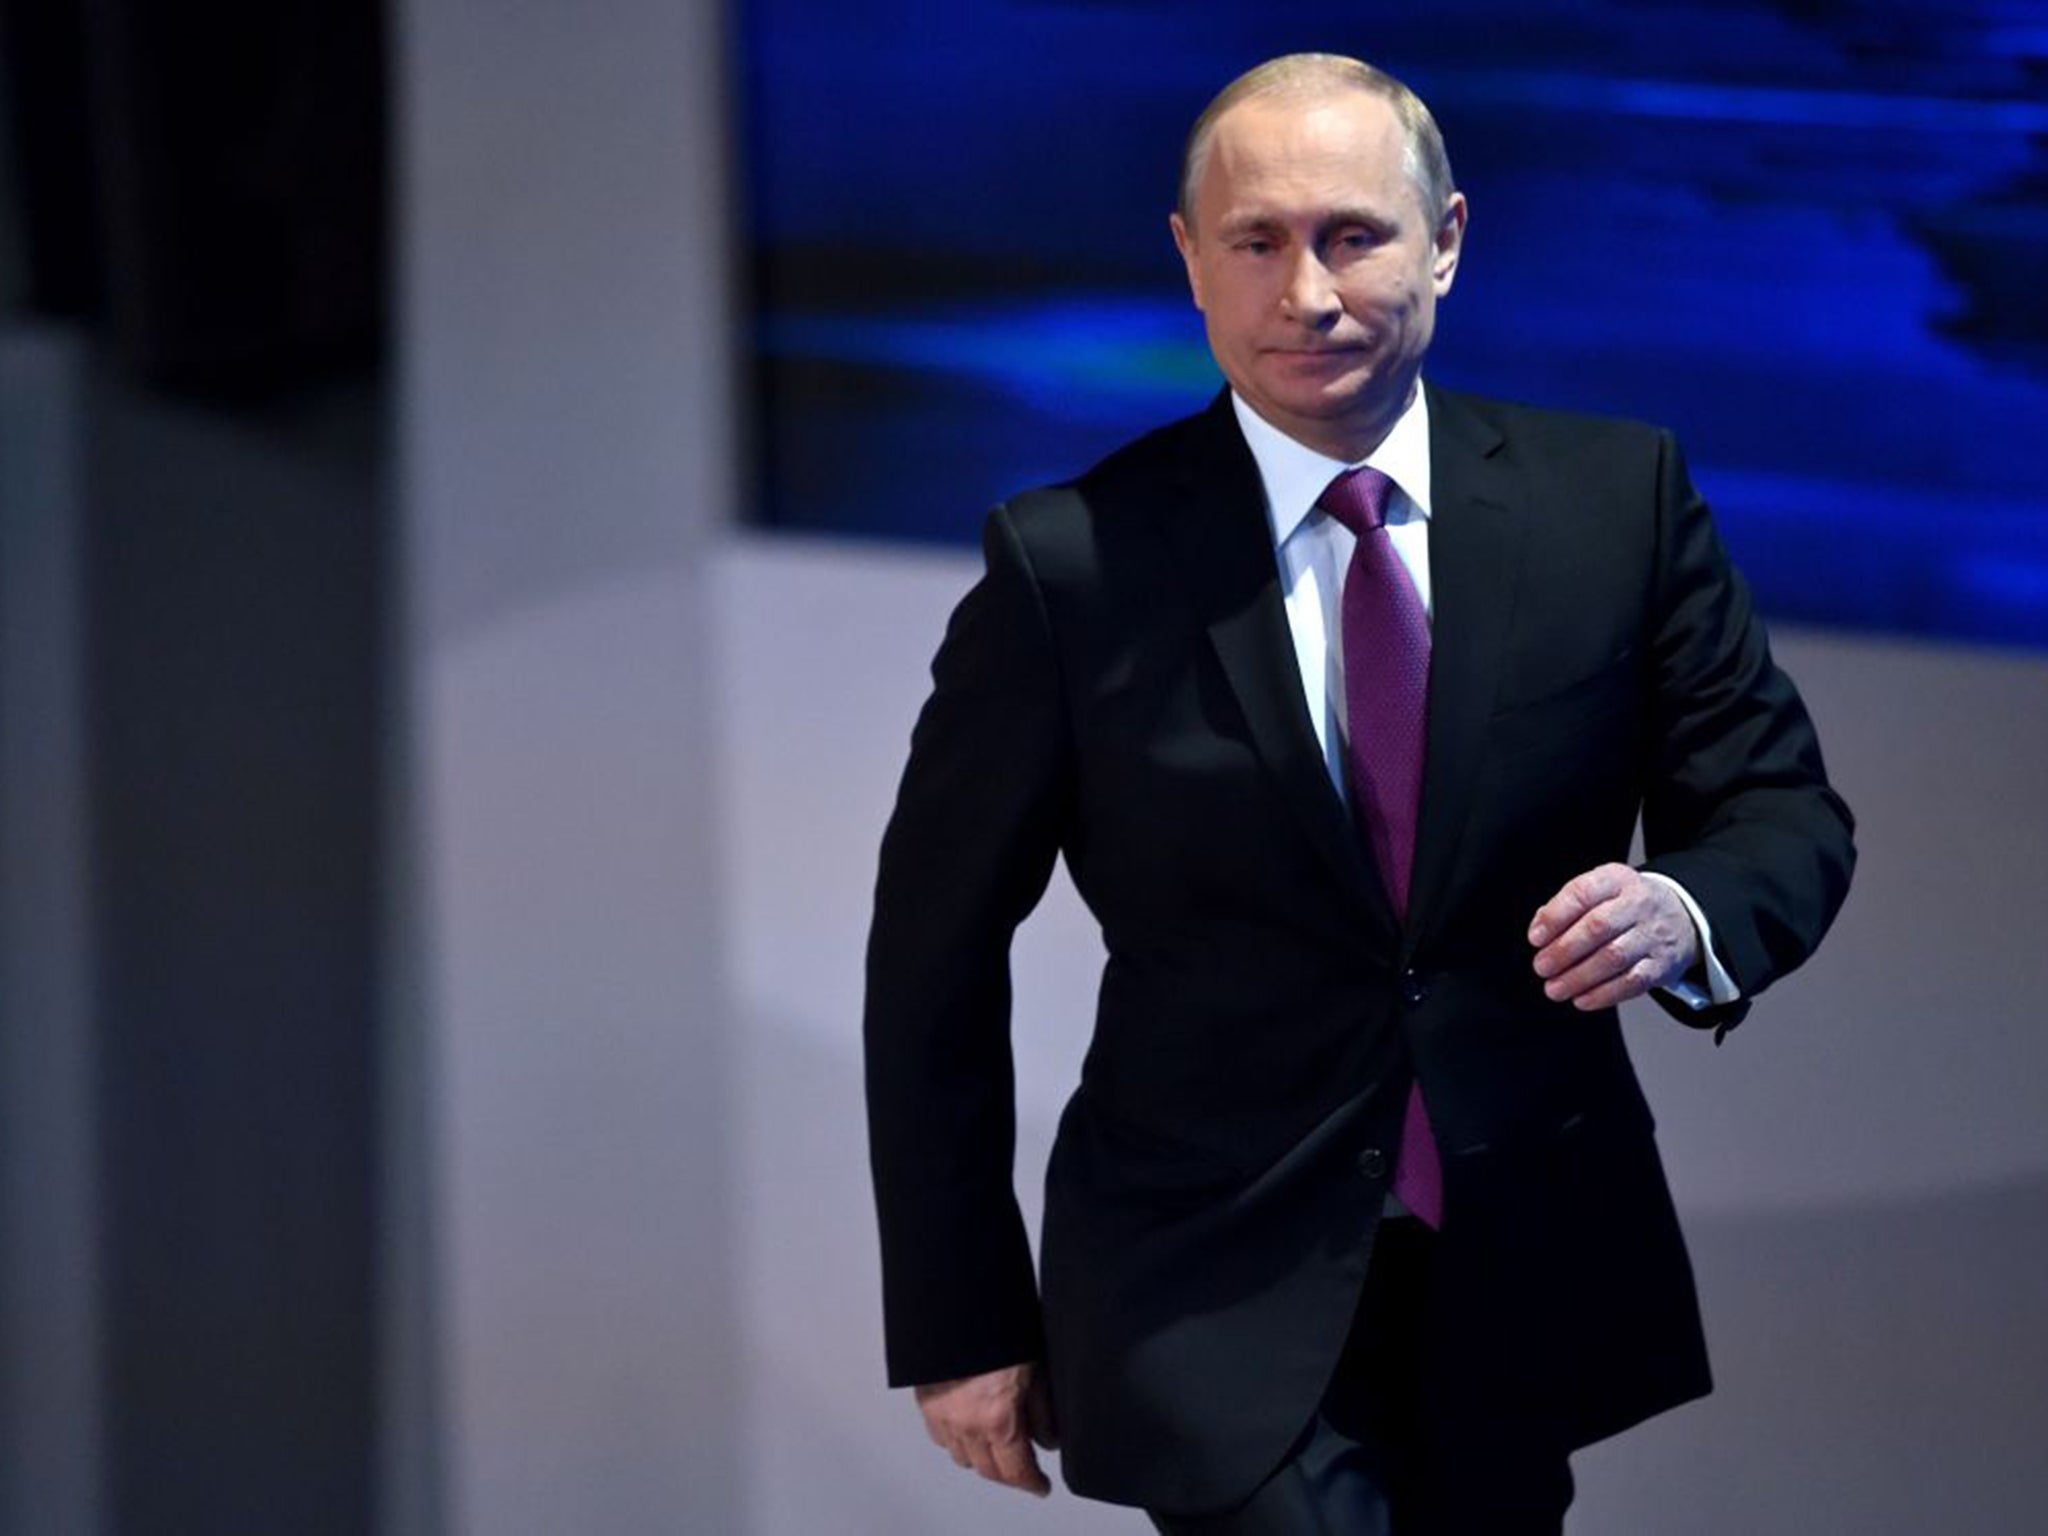 The fall in the oil price will hit Russia hard, but is unlikely to personally affect the Russian leader, Vladimir Putin